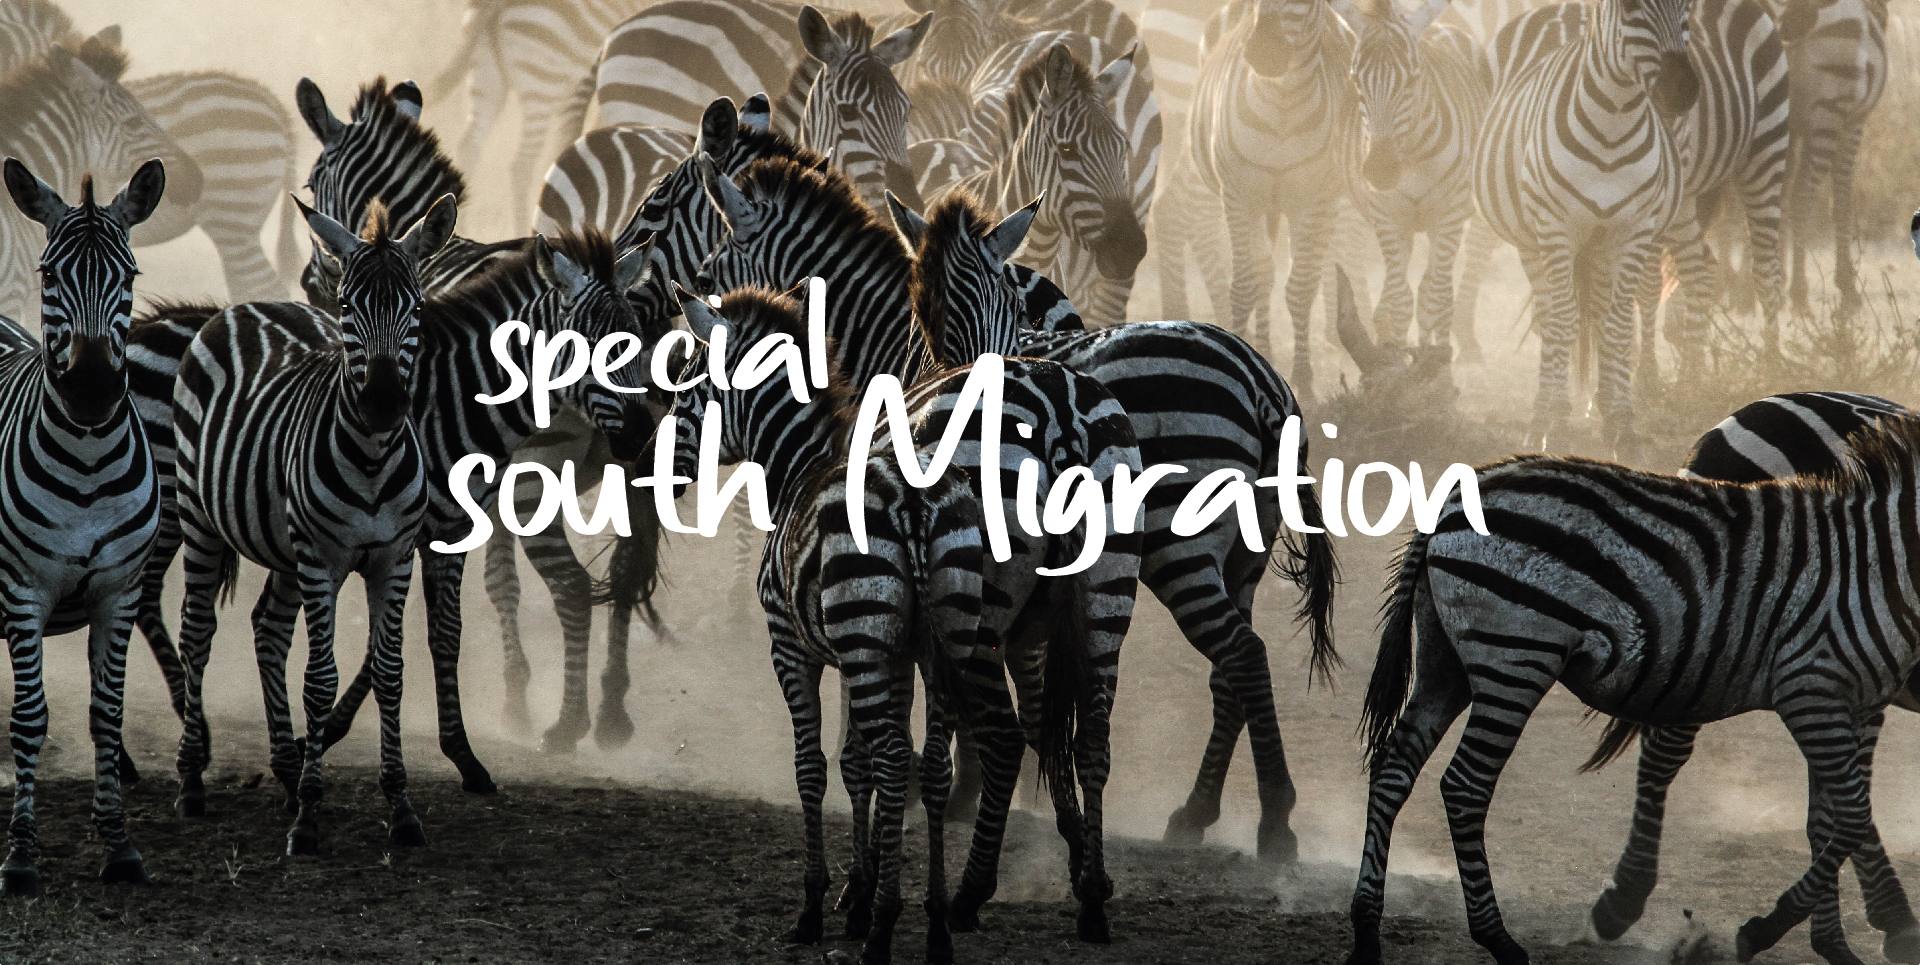 SPECIAL SOUTH MIGRATION